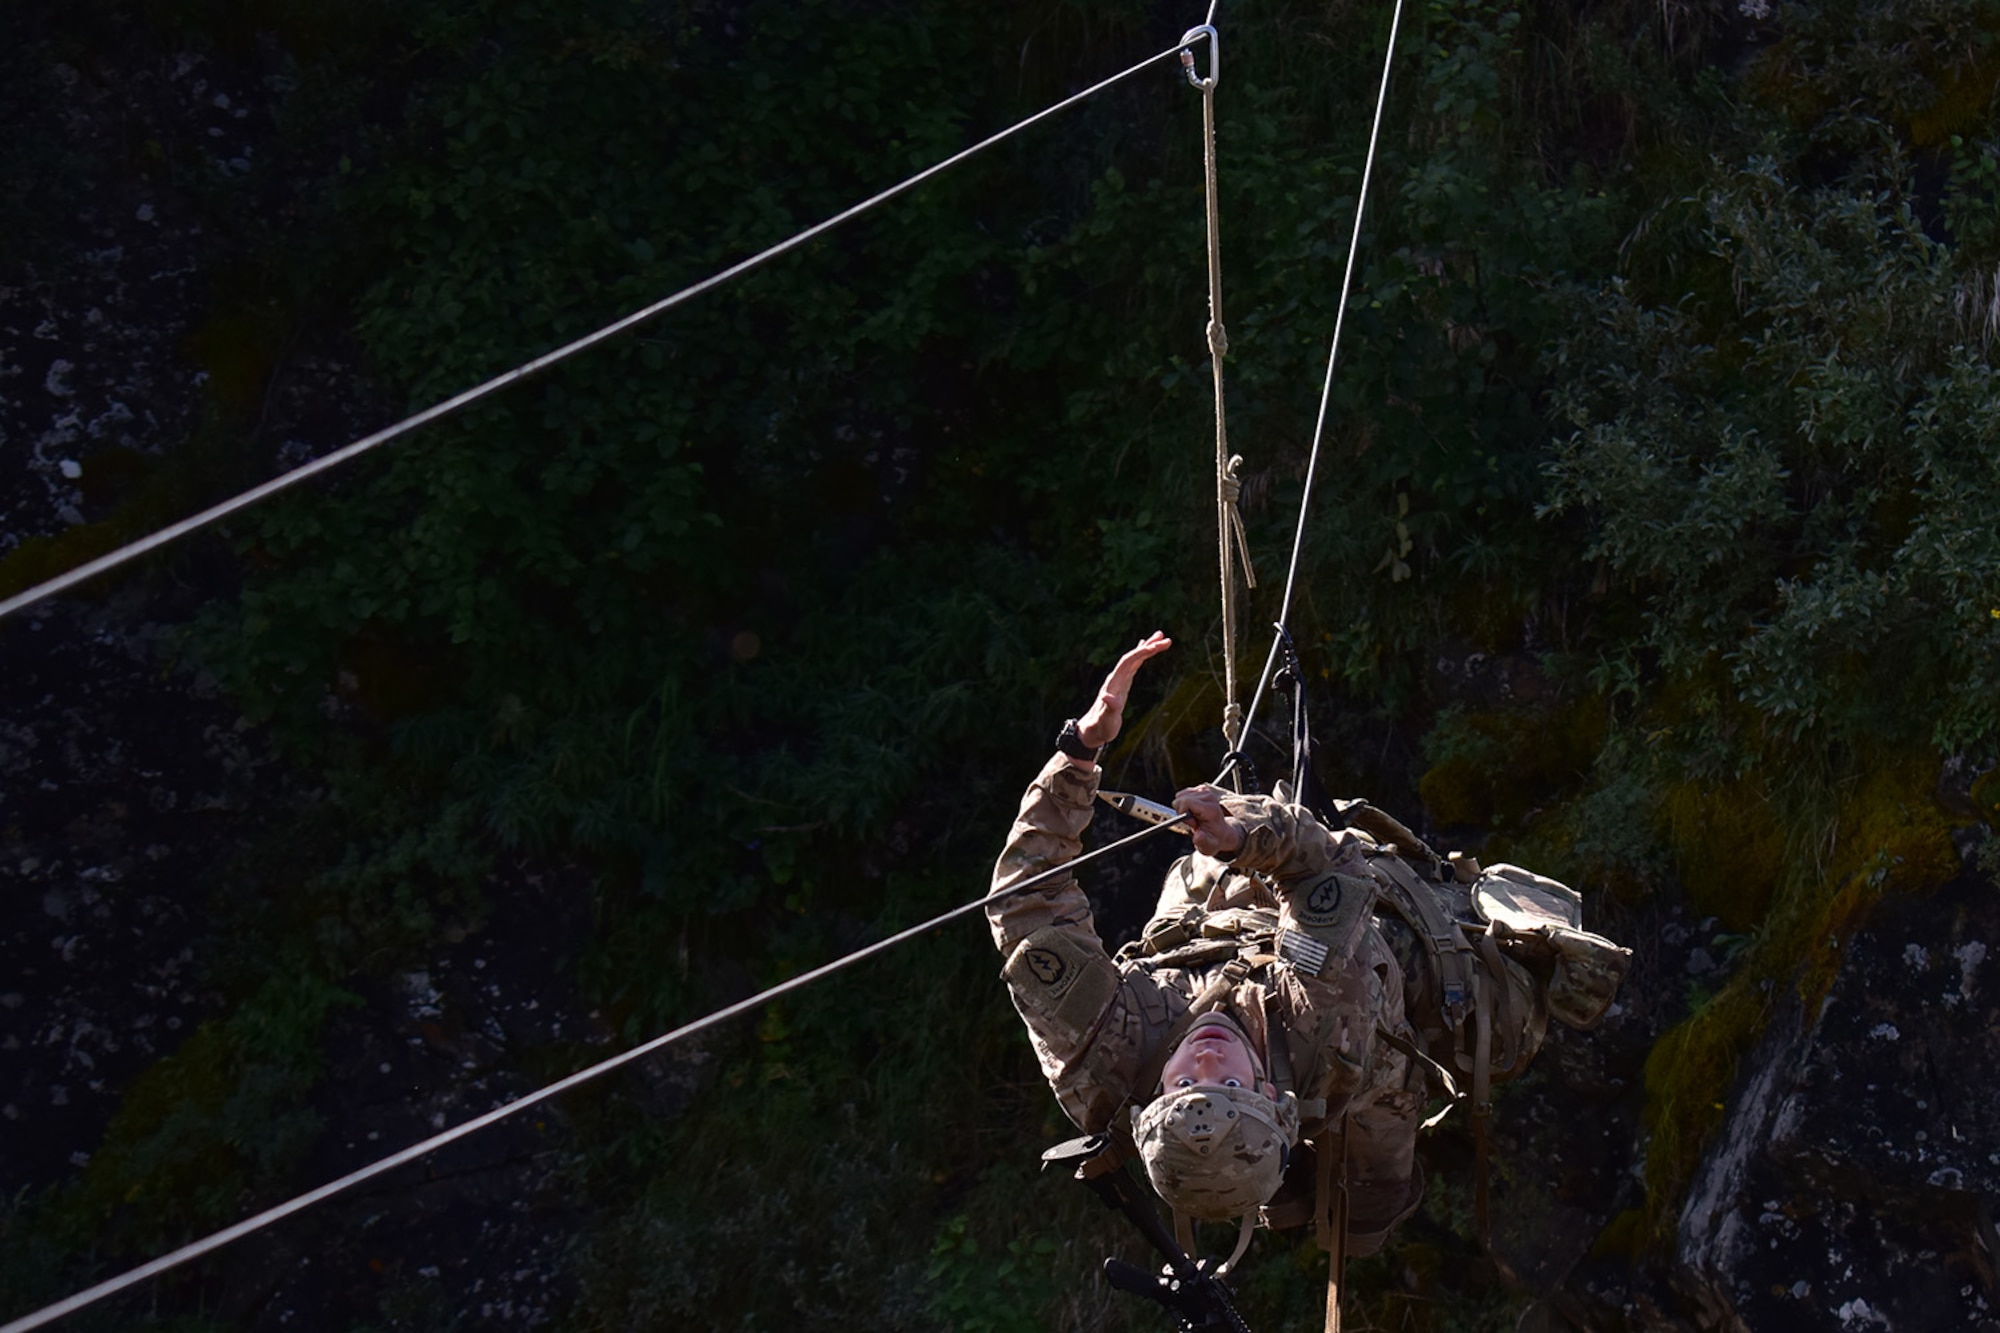 Basic Military Mountaineering Course student Spc. Kevin Vang crosses a rope bridge over a mountain gorge at the Northern Warfare Training Center’s Black Rapids Site during training. NWTC cadre followed Coronavirus restrictions while guiding students through both the basic and advanced mountaineering courses in August. With the advent of Alaska’s long, cold winter, NWTC’s focus is now shifting to cold weather training for the 2020-21 season.